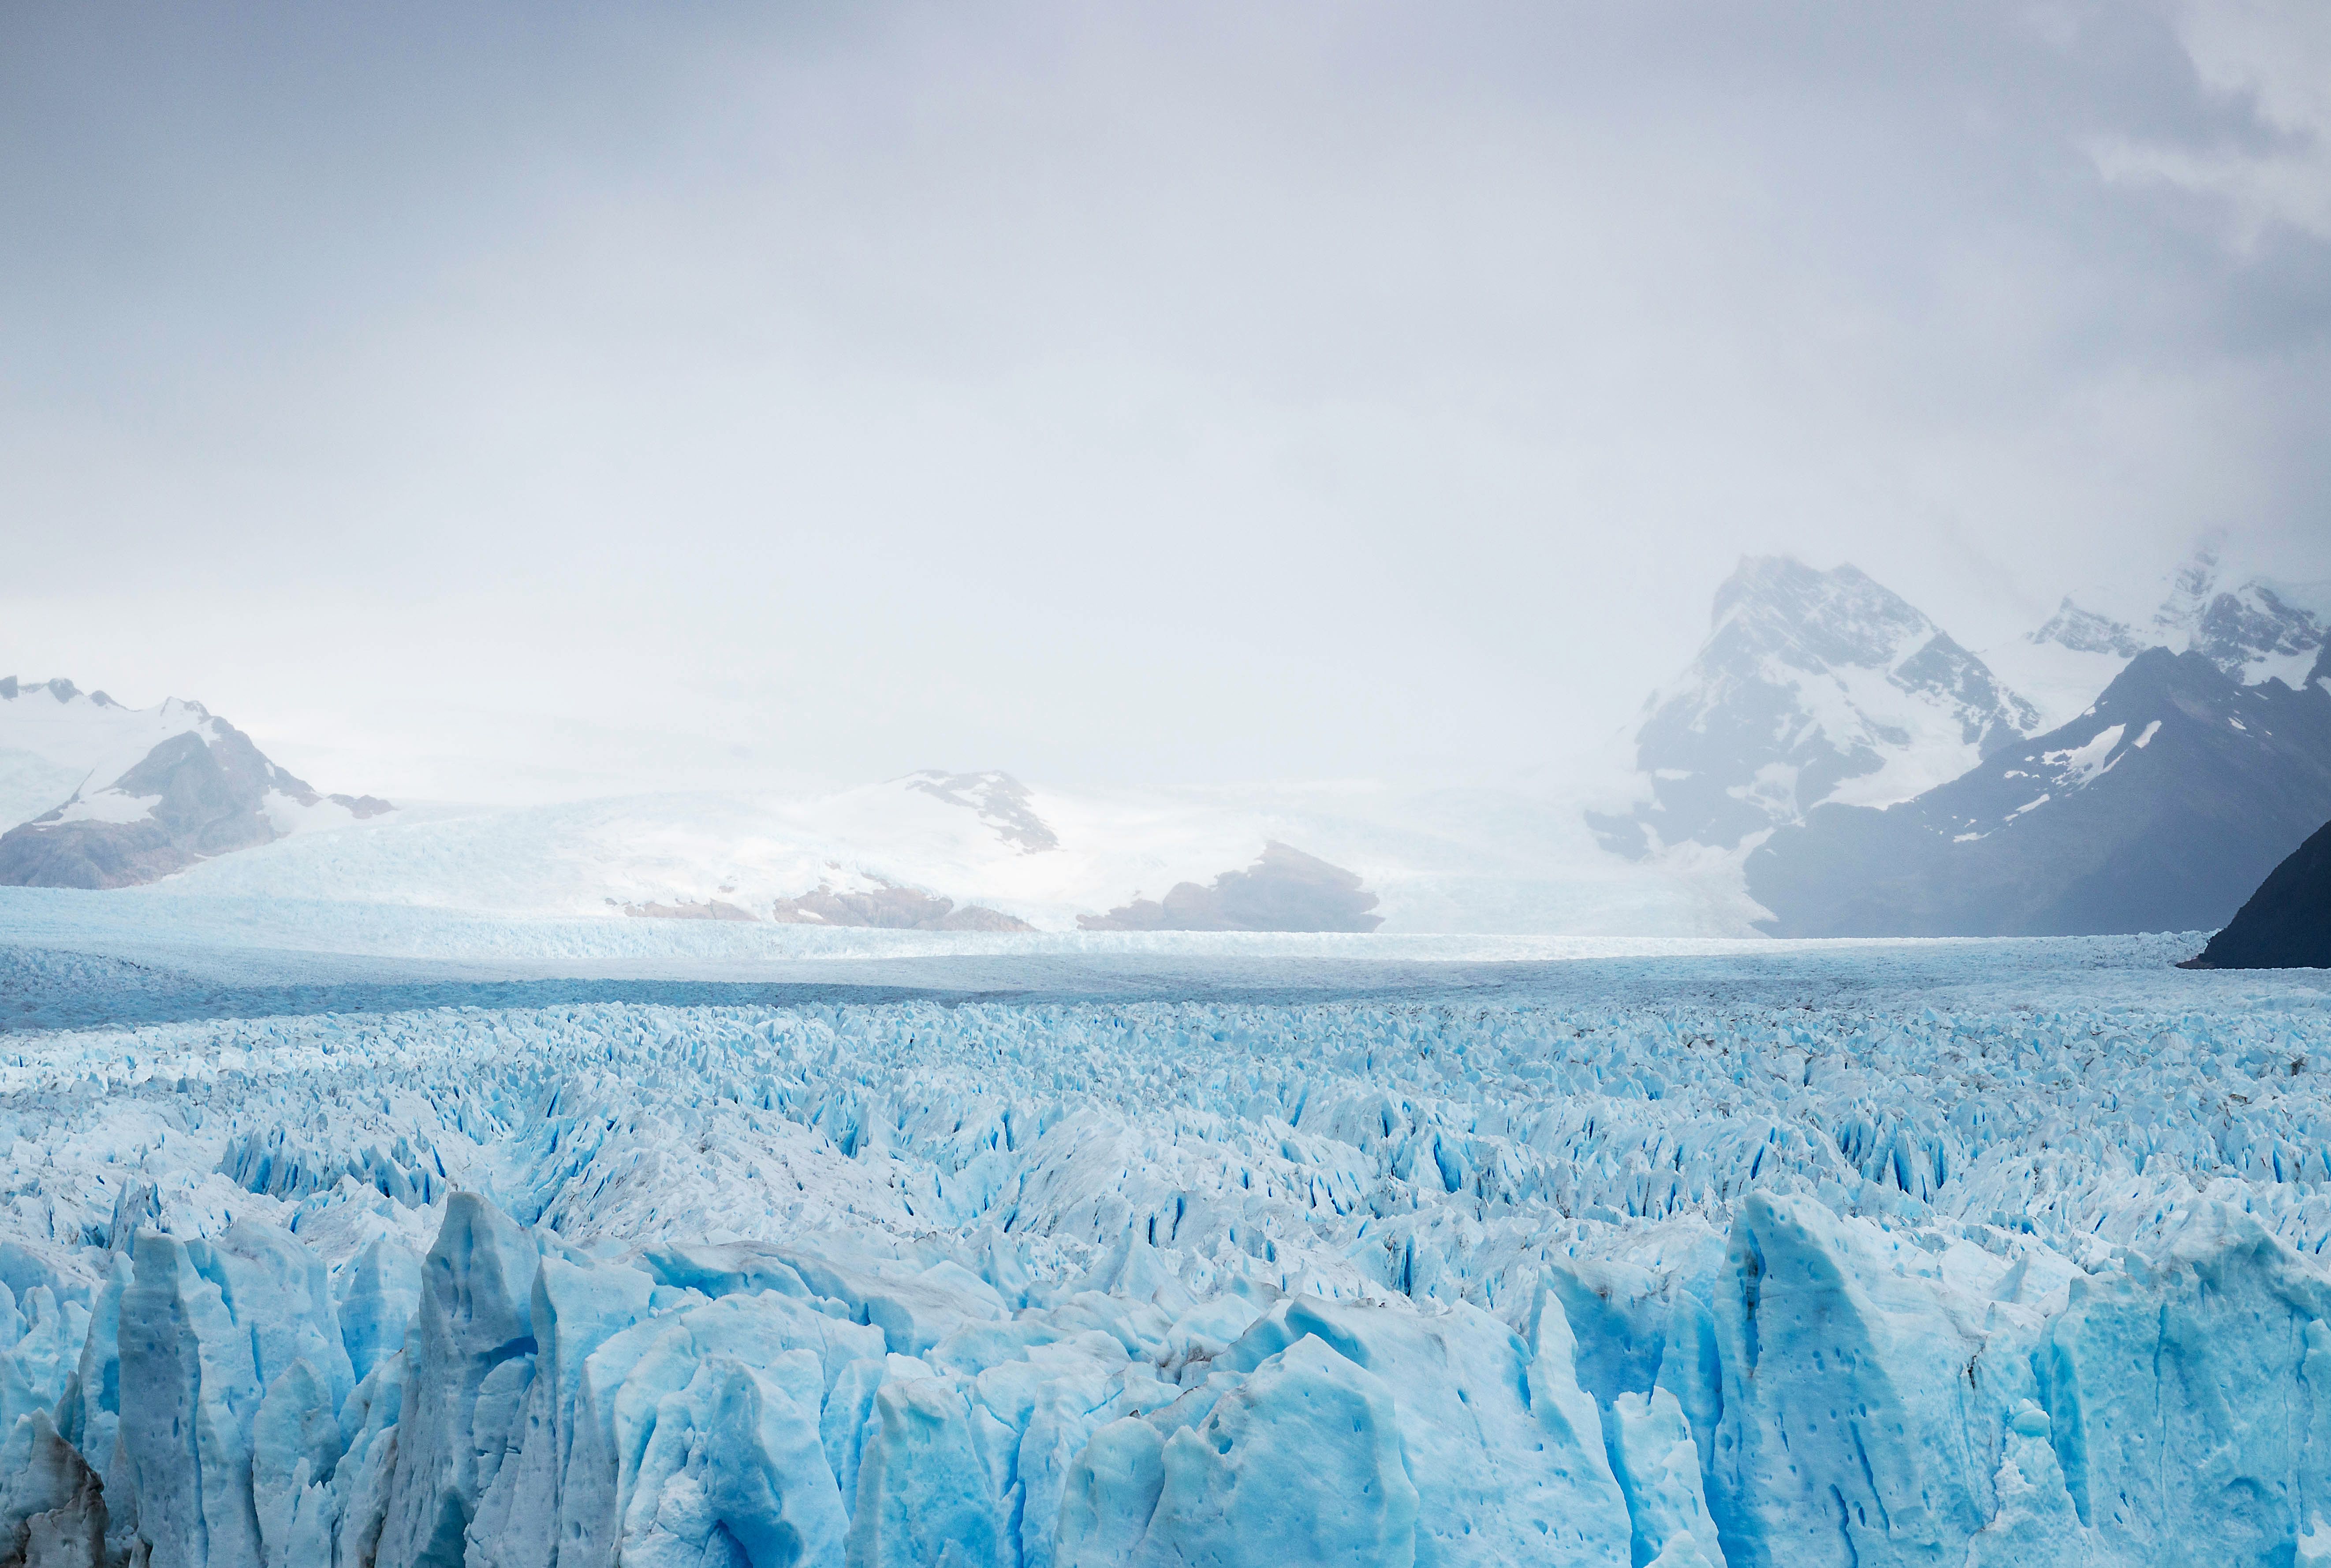 antarctica - Trivia, Quizzes, and Brain Teasers | Mental Floss